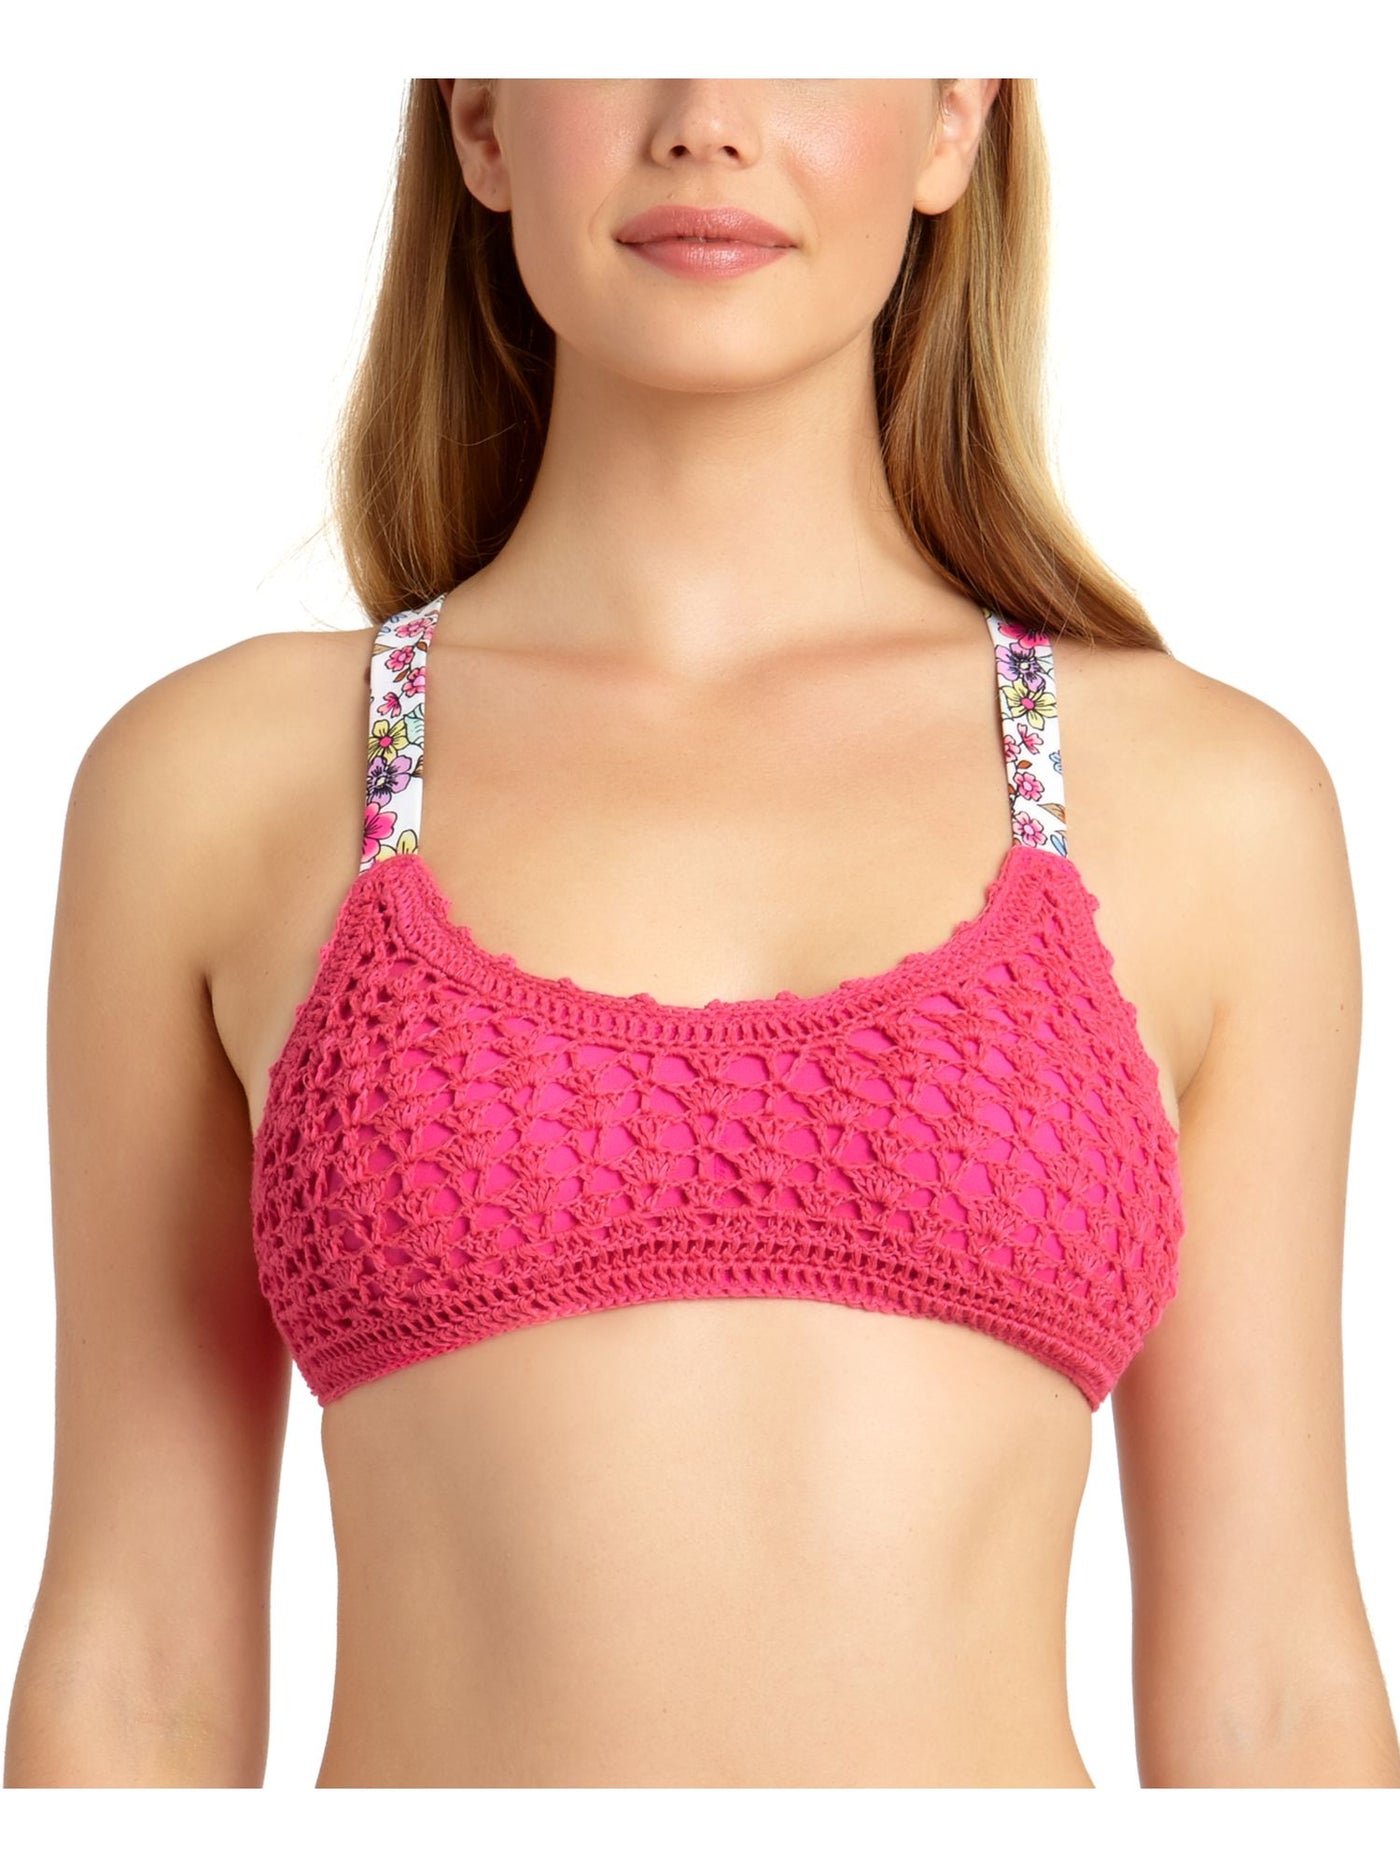 California Waves Women's Pink Color Block Stretch Removable Cups Lined Crochet Tie Bralette Swimsuit Top L